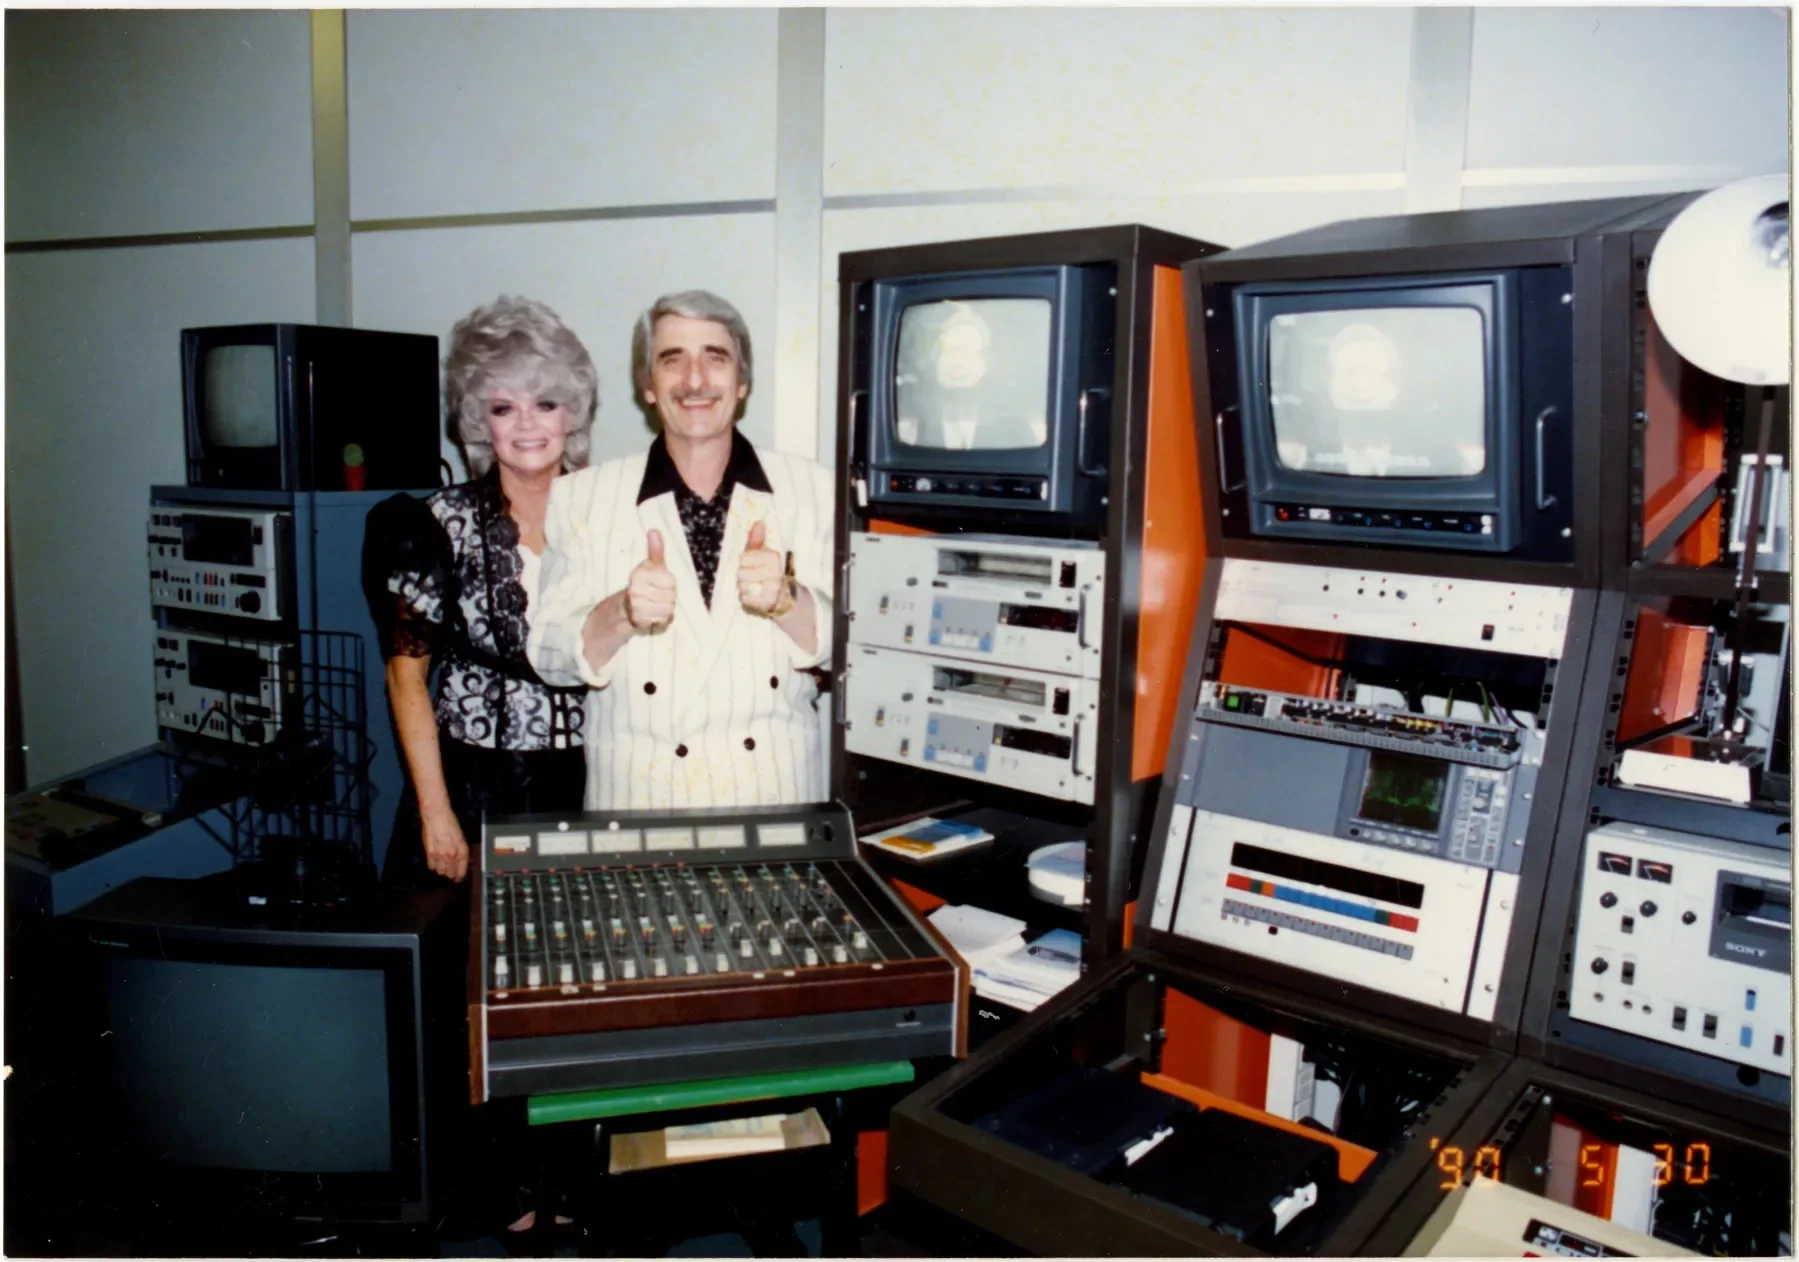 TBN History - Paul and Jan Crouch